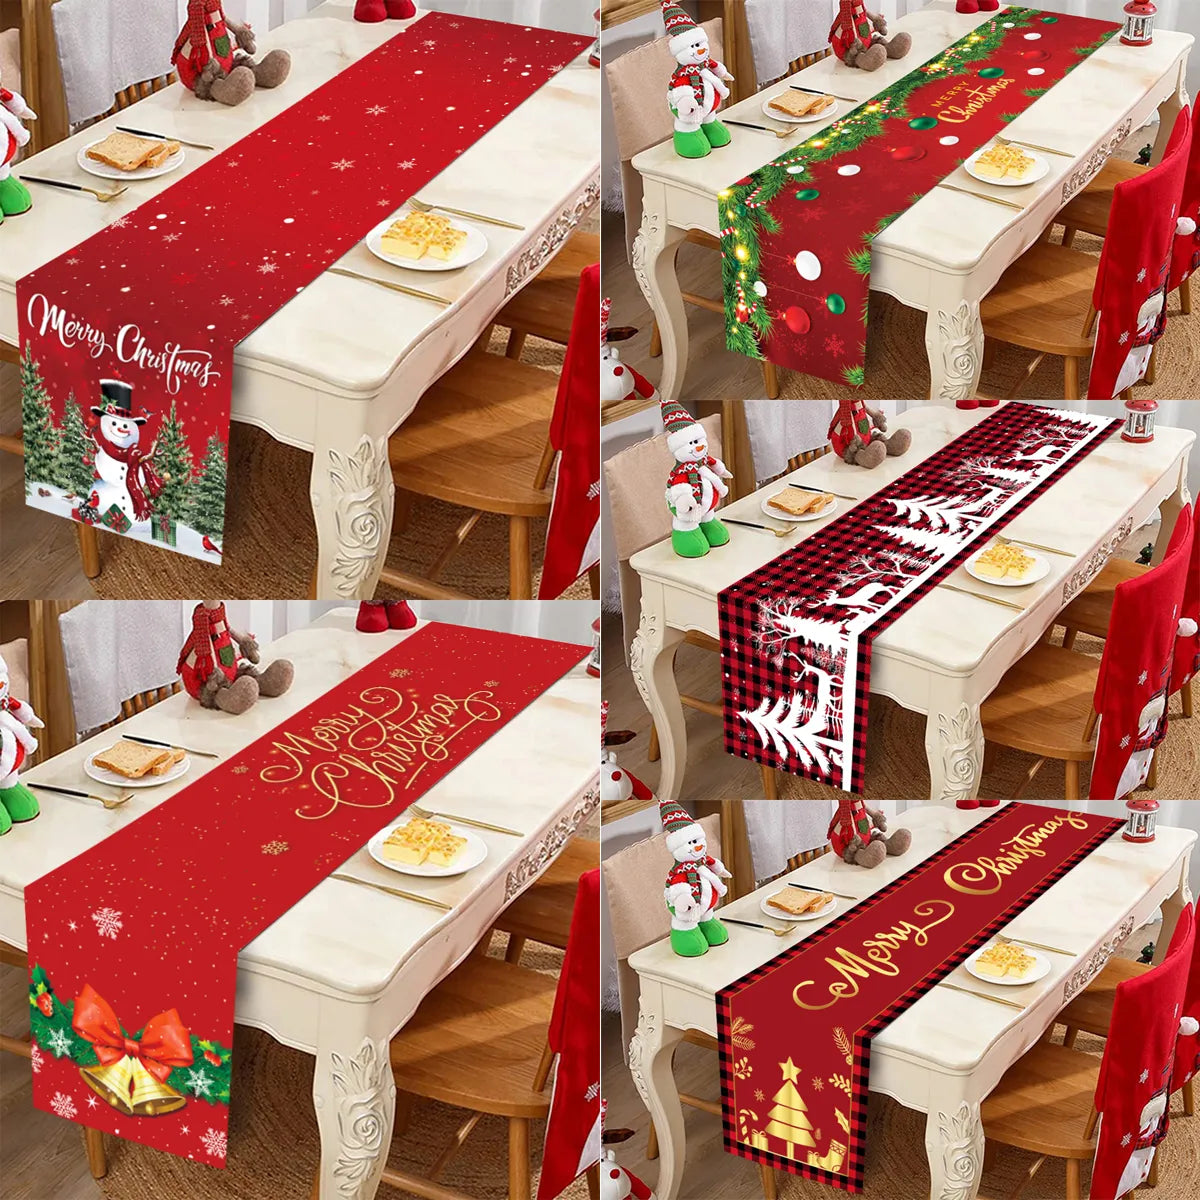 Premium Merry Christmas Table Runner Decorations Tablecloth - The GoatFind polyester 1, polyester 2, polyester 3, polyester 4, polyester 5, polyester 6, polyester 7, polyester 8, polyester 9, polyester 10